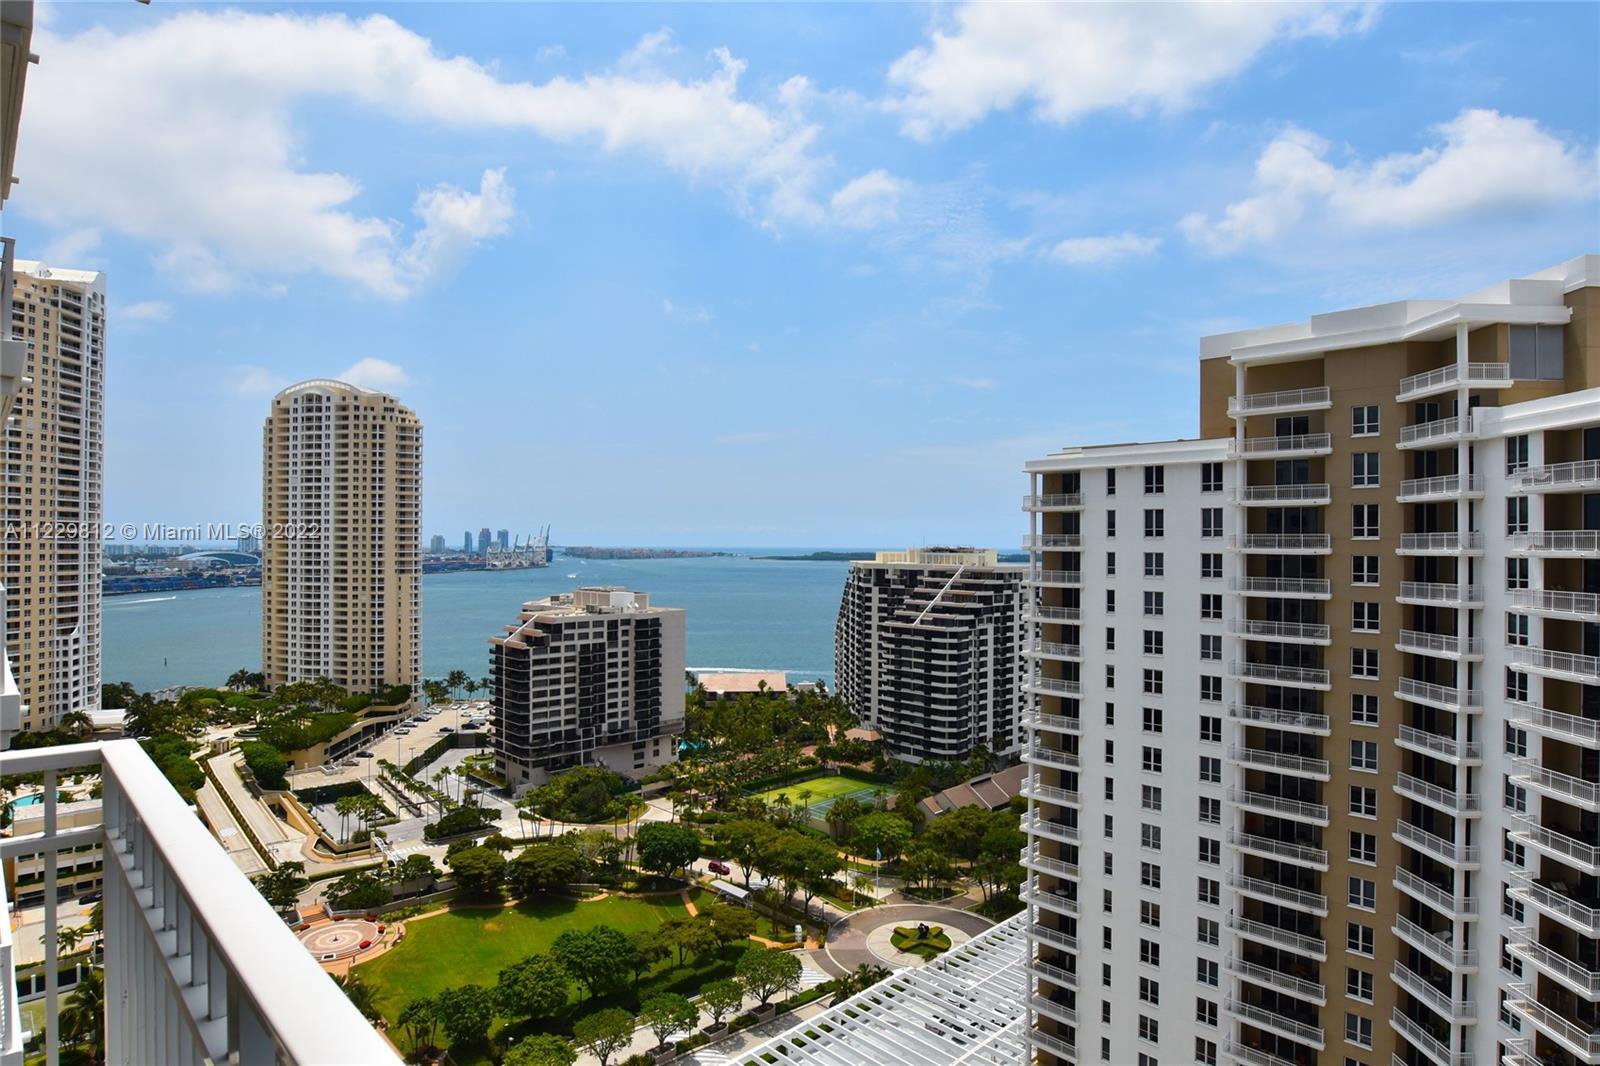 Amazing water and city views from this spacious 1 bed/1.5 bath in exclusive Brickell Key. This cozy 